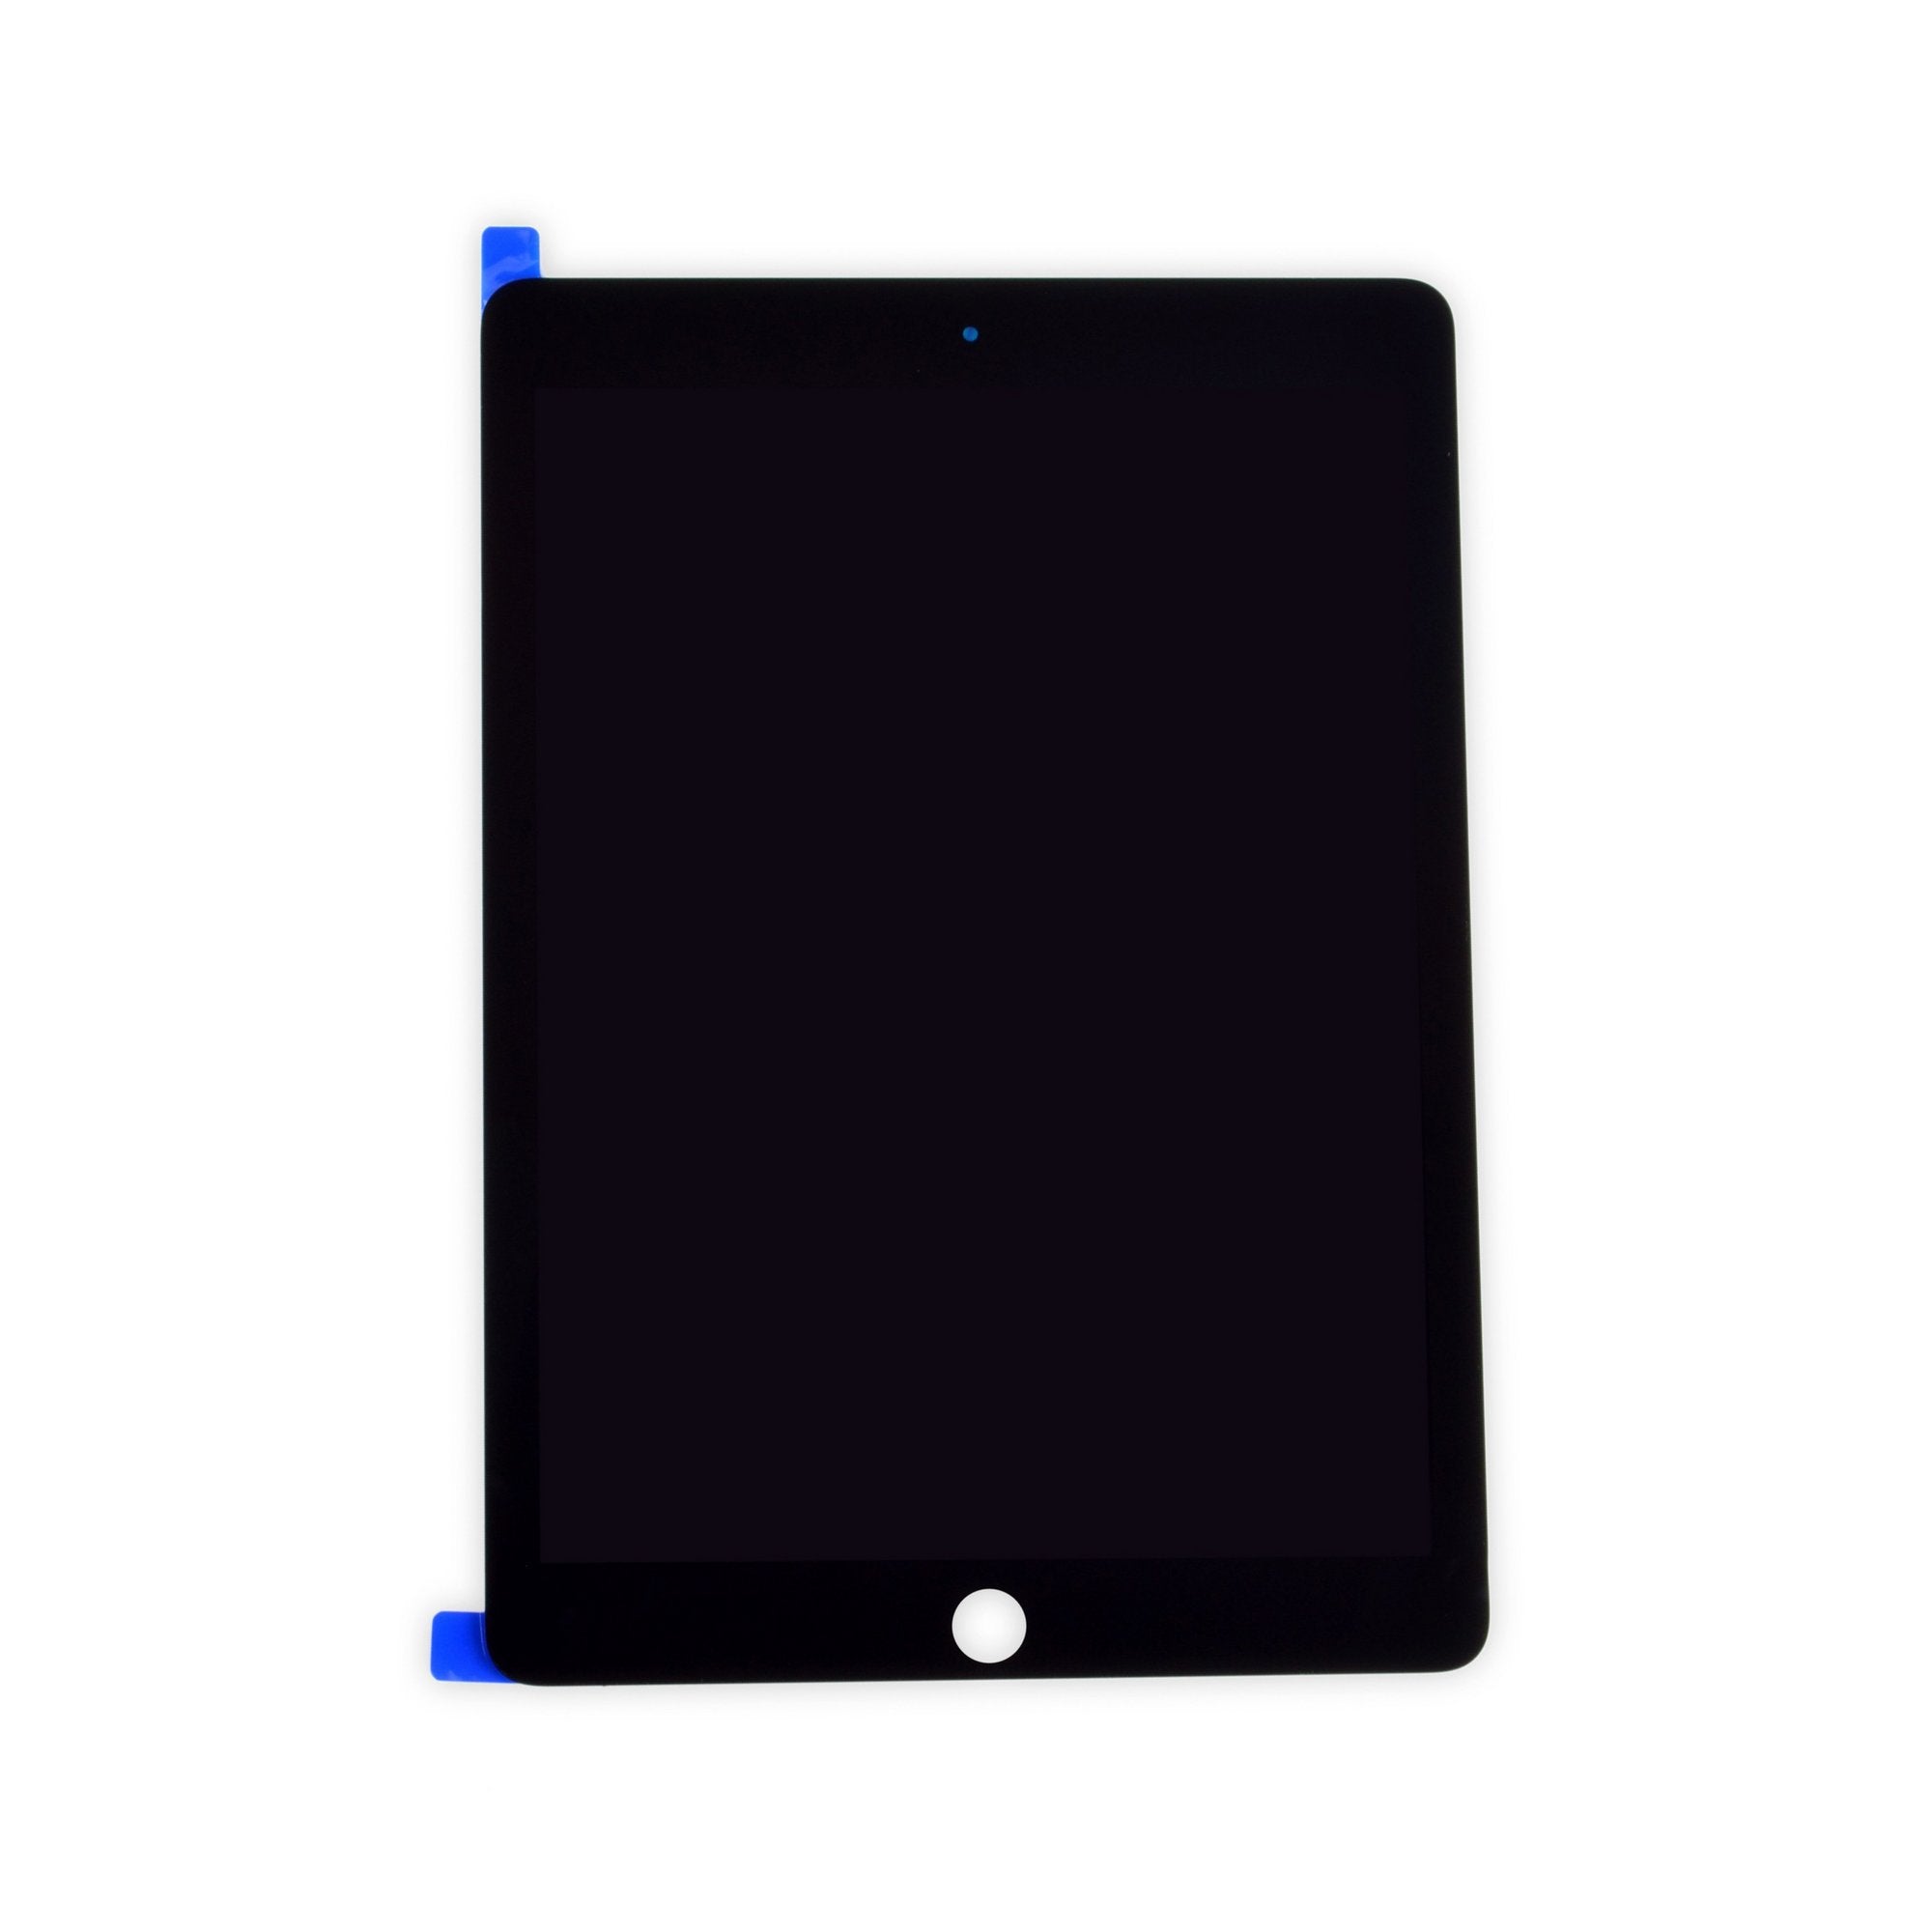 iPad Pro 9.7 LCD Display Touch Screen Digitizer Assembly A1673 A1674 A1675  USA